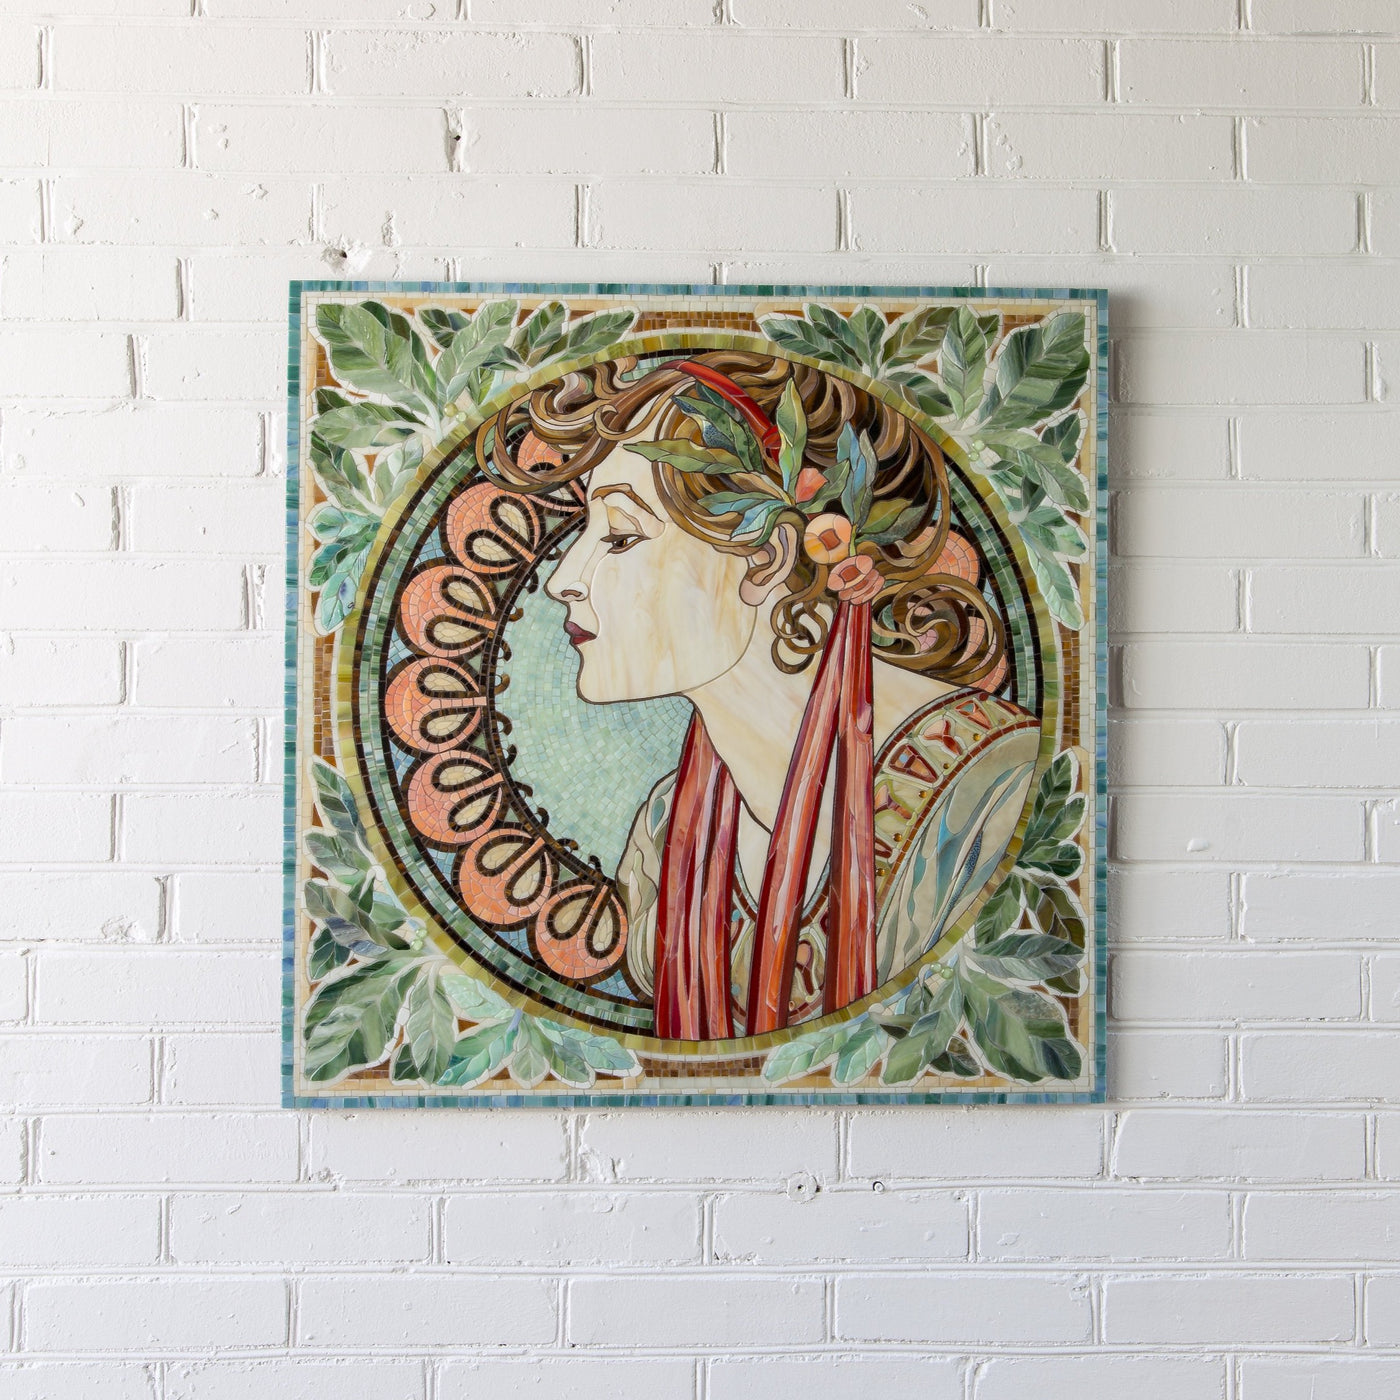 Mosaic of stained glass depicting woman in laurel by Alphonse Mucha for wall decor